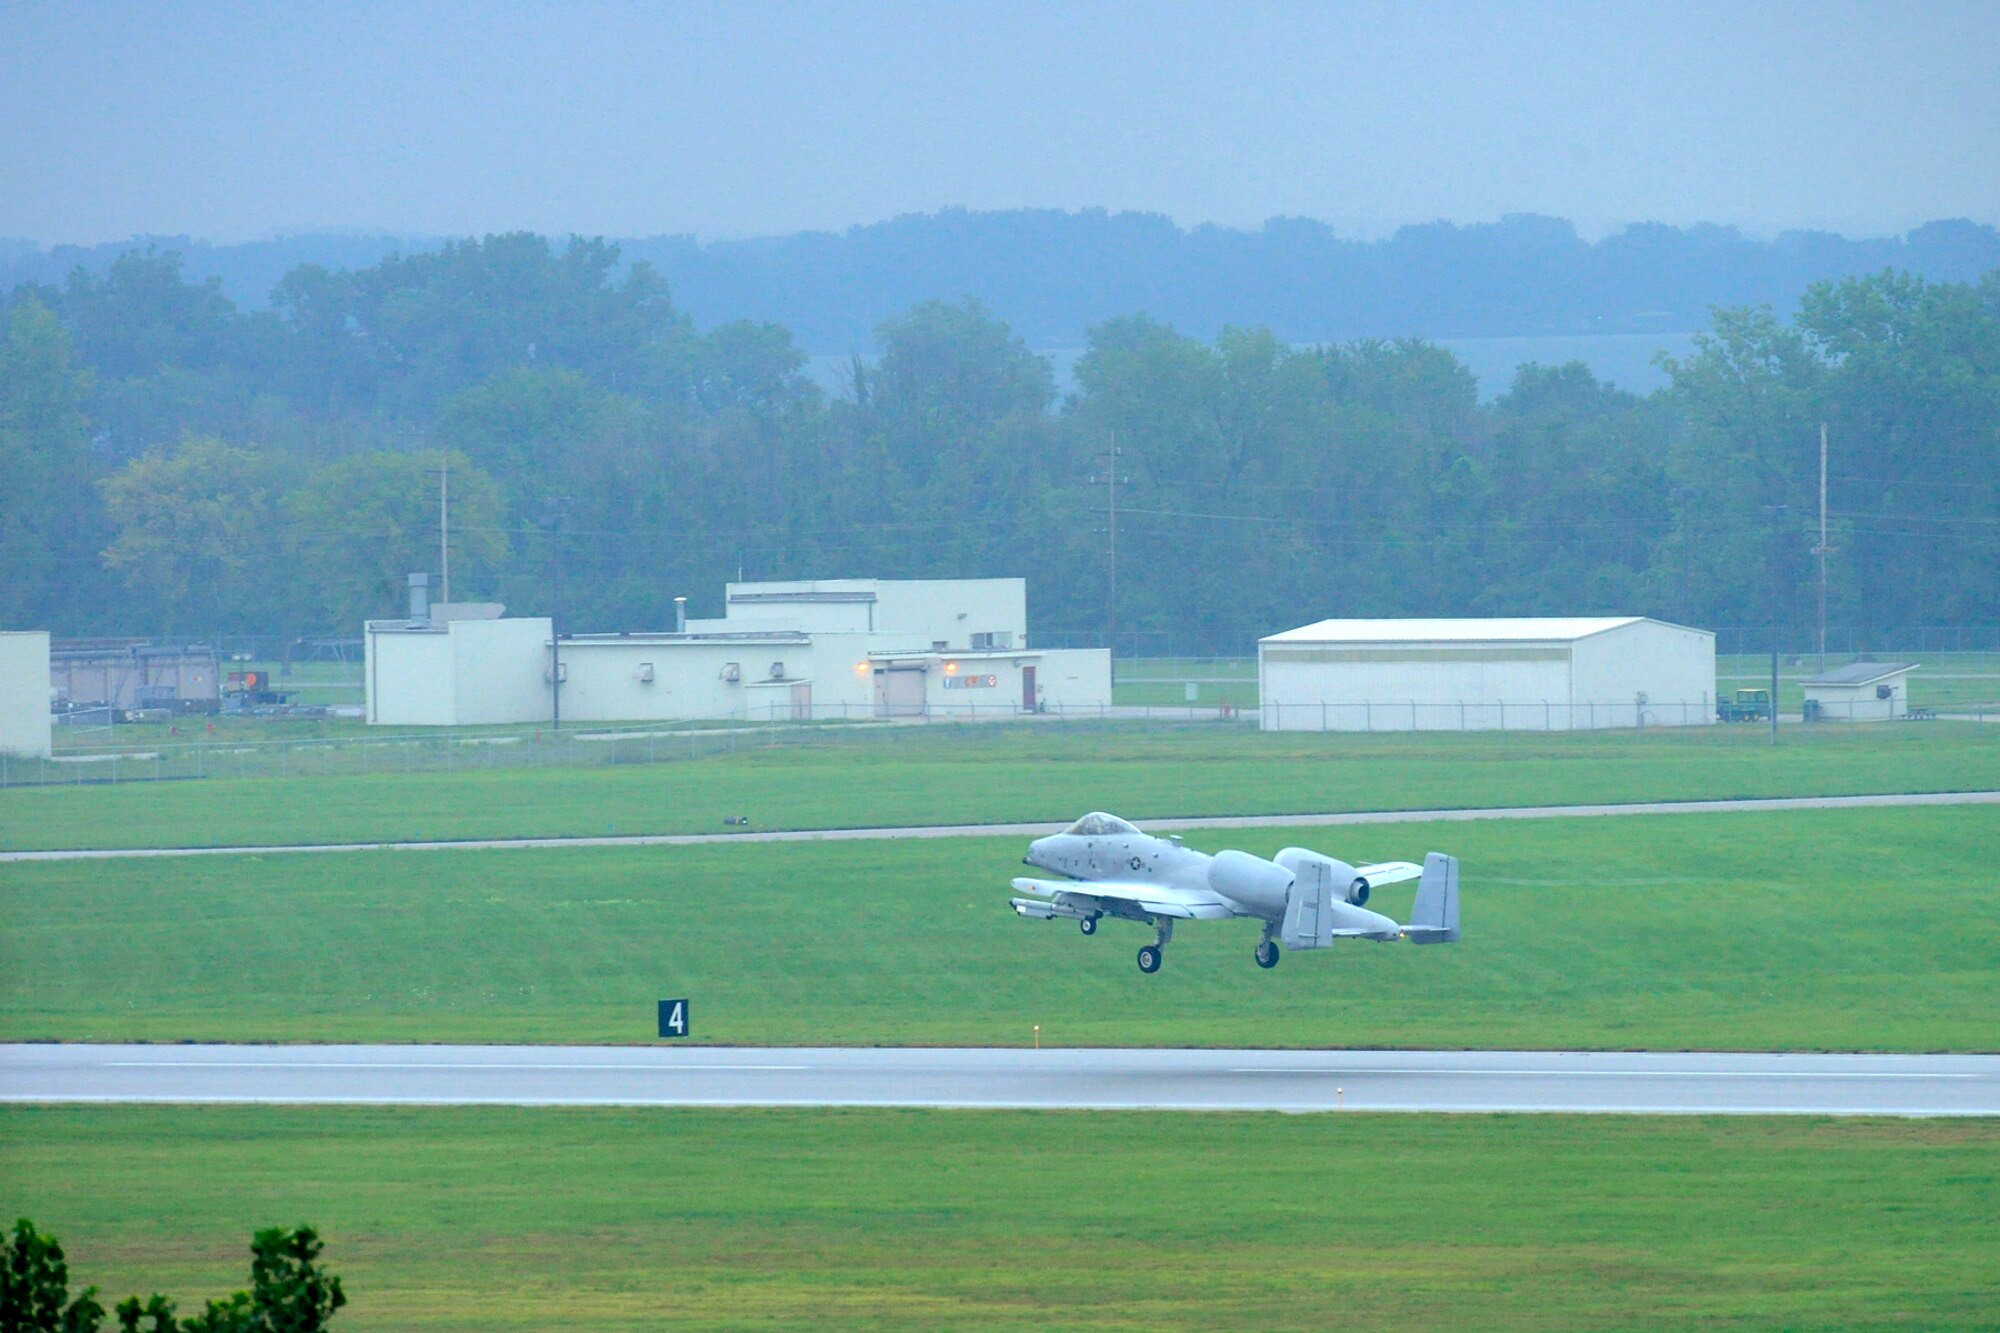 An A-10 Thunderbolt II aircraft takes off during an early morning rain at Selfridge Air National Guard Base, Mich., Aug. 10, 2012. Airmen from the 107th Fighter Squadron, who fly the aircraft, and the 127th Maintenance Group, who maintain the aircraft, participated in a surge operation, launching and recovering a higher-than-usual number of aircraft, as part of a series of readiness training exercises taking place at the base in August. (Air National Guard photo by John S. Swanson)